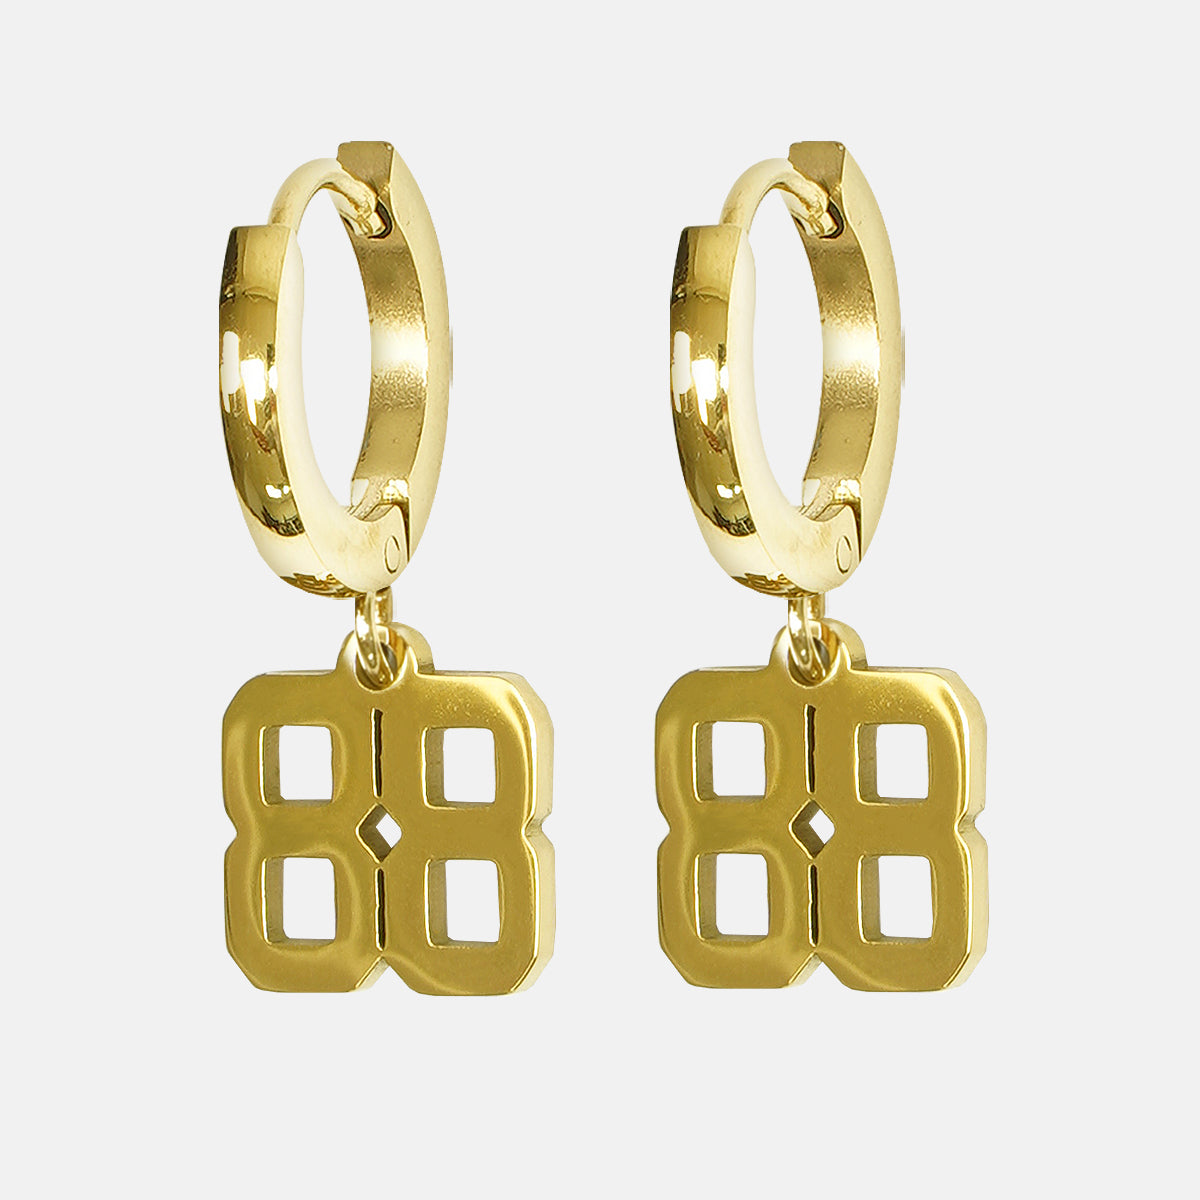 88 Number Earring - Gold Plated Stainless Steel